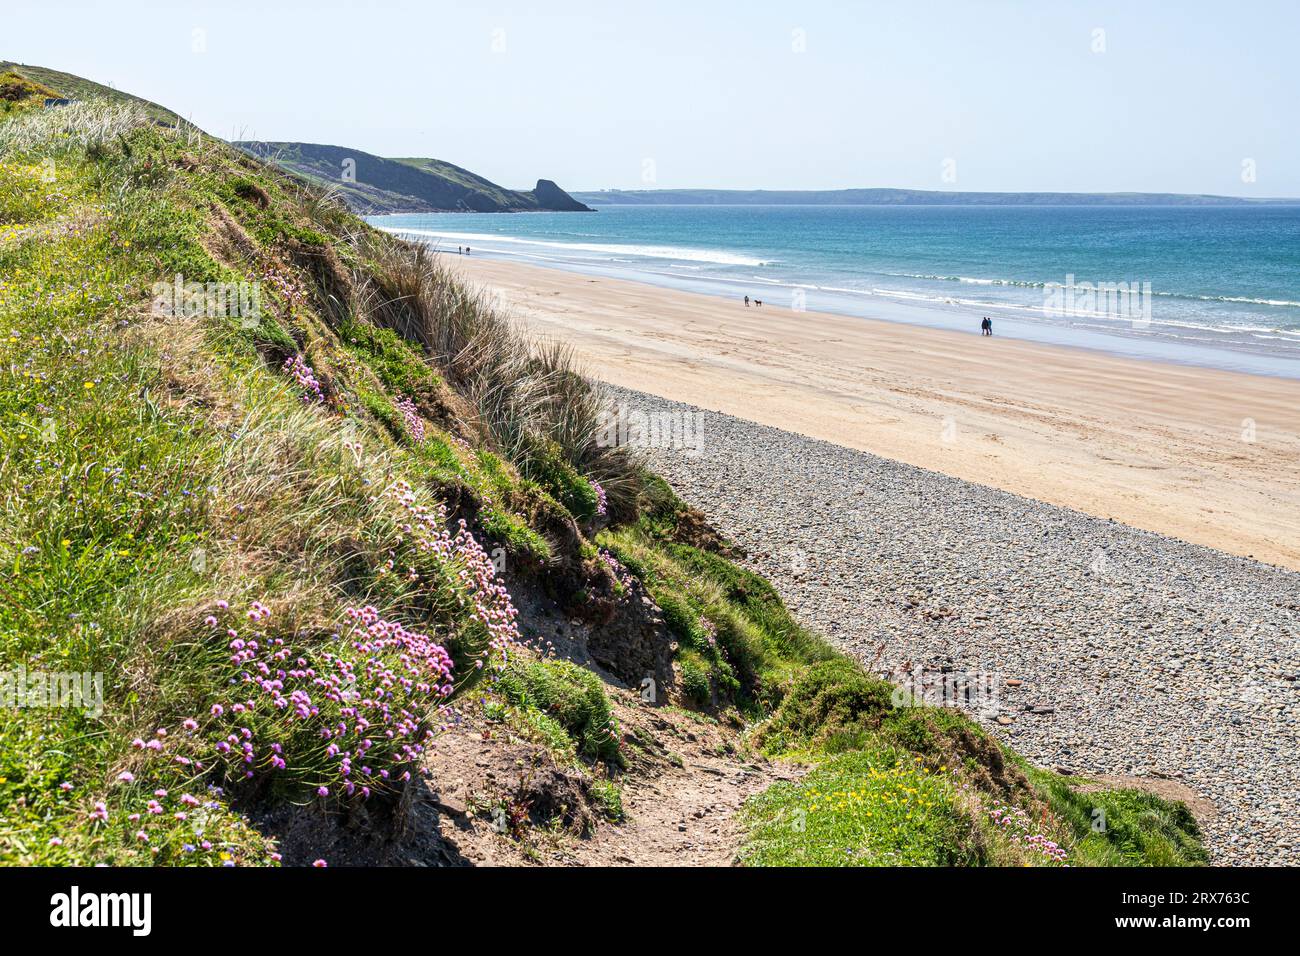 People walking on Newgale beach in the Pembrokeshire Coast National Park, West Wales UK Stock Photo